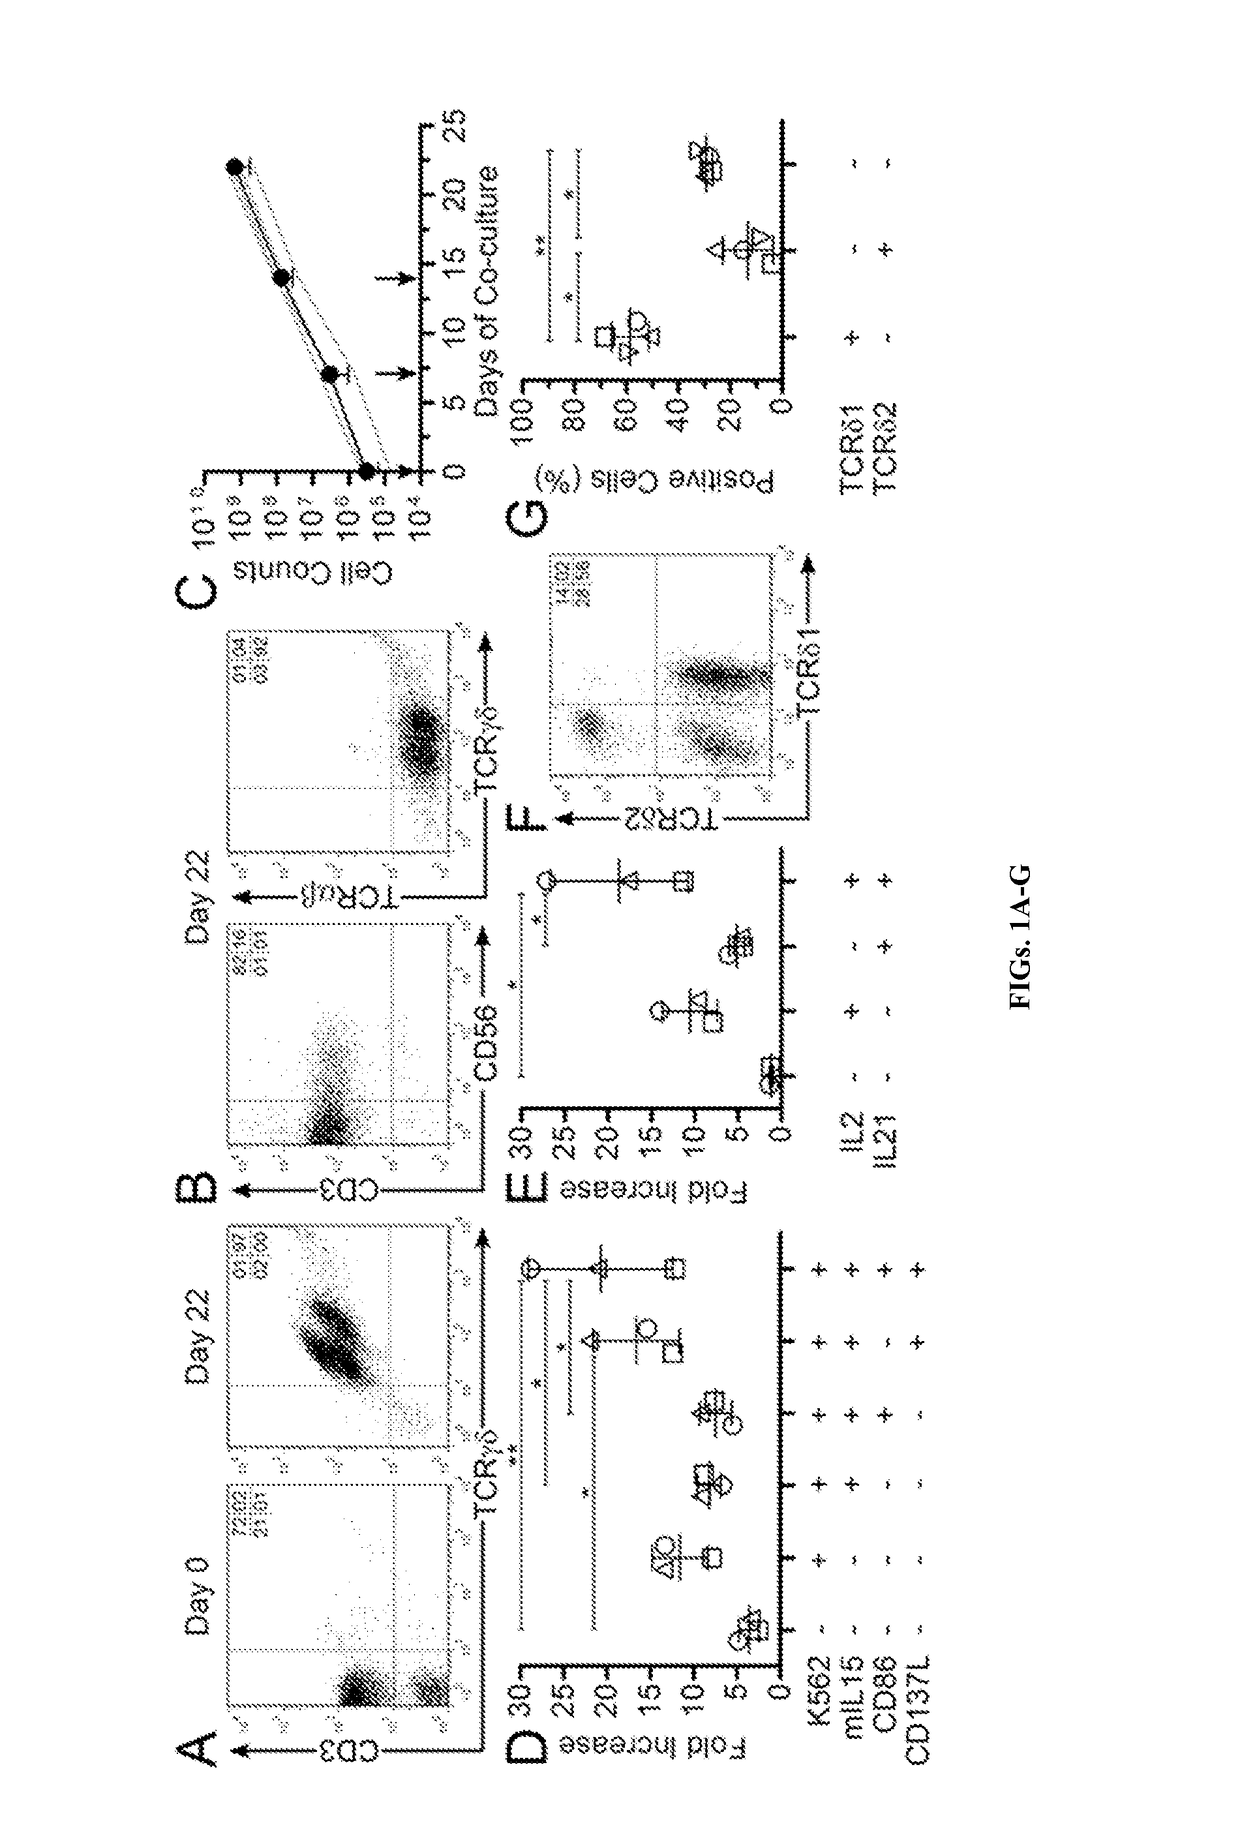 Polyclonal gamma delta T cells for immunotherapy